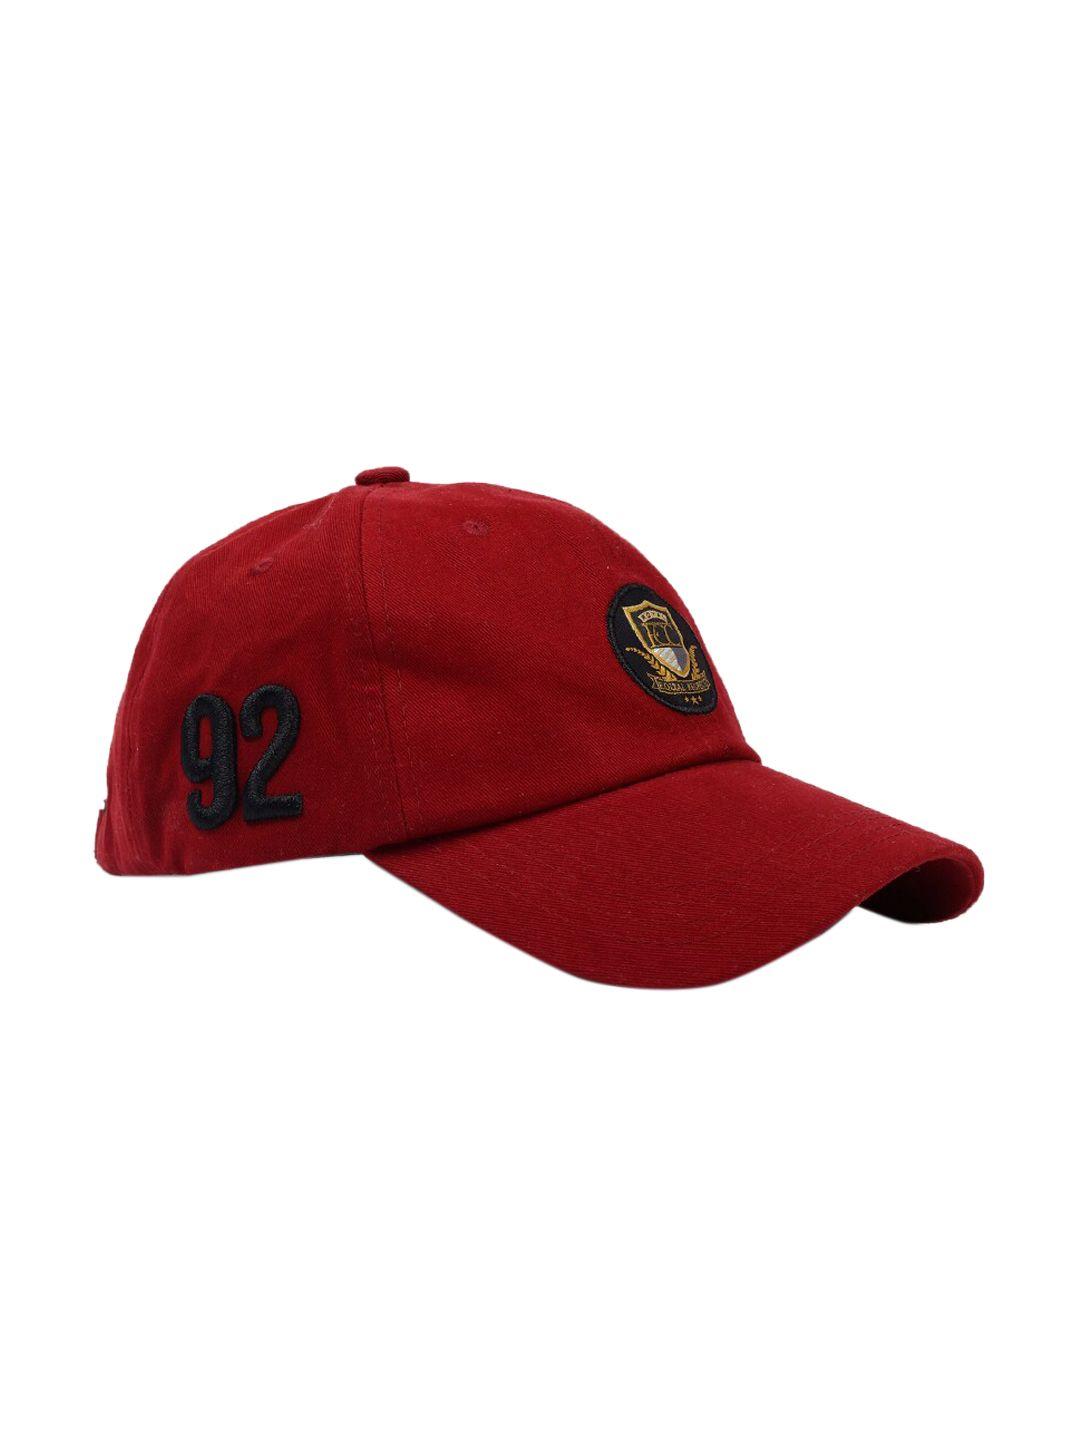 forever 21 men red royal fcc embroidered pure cotton baseball cap